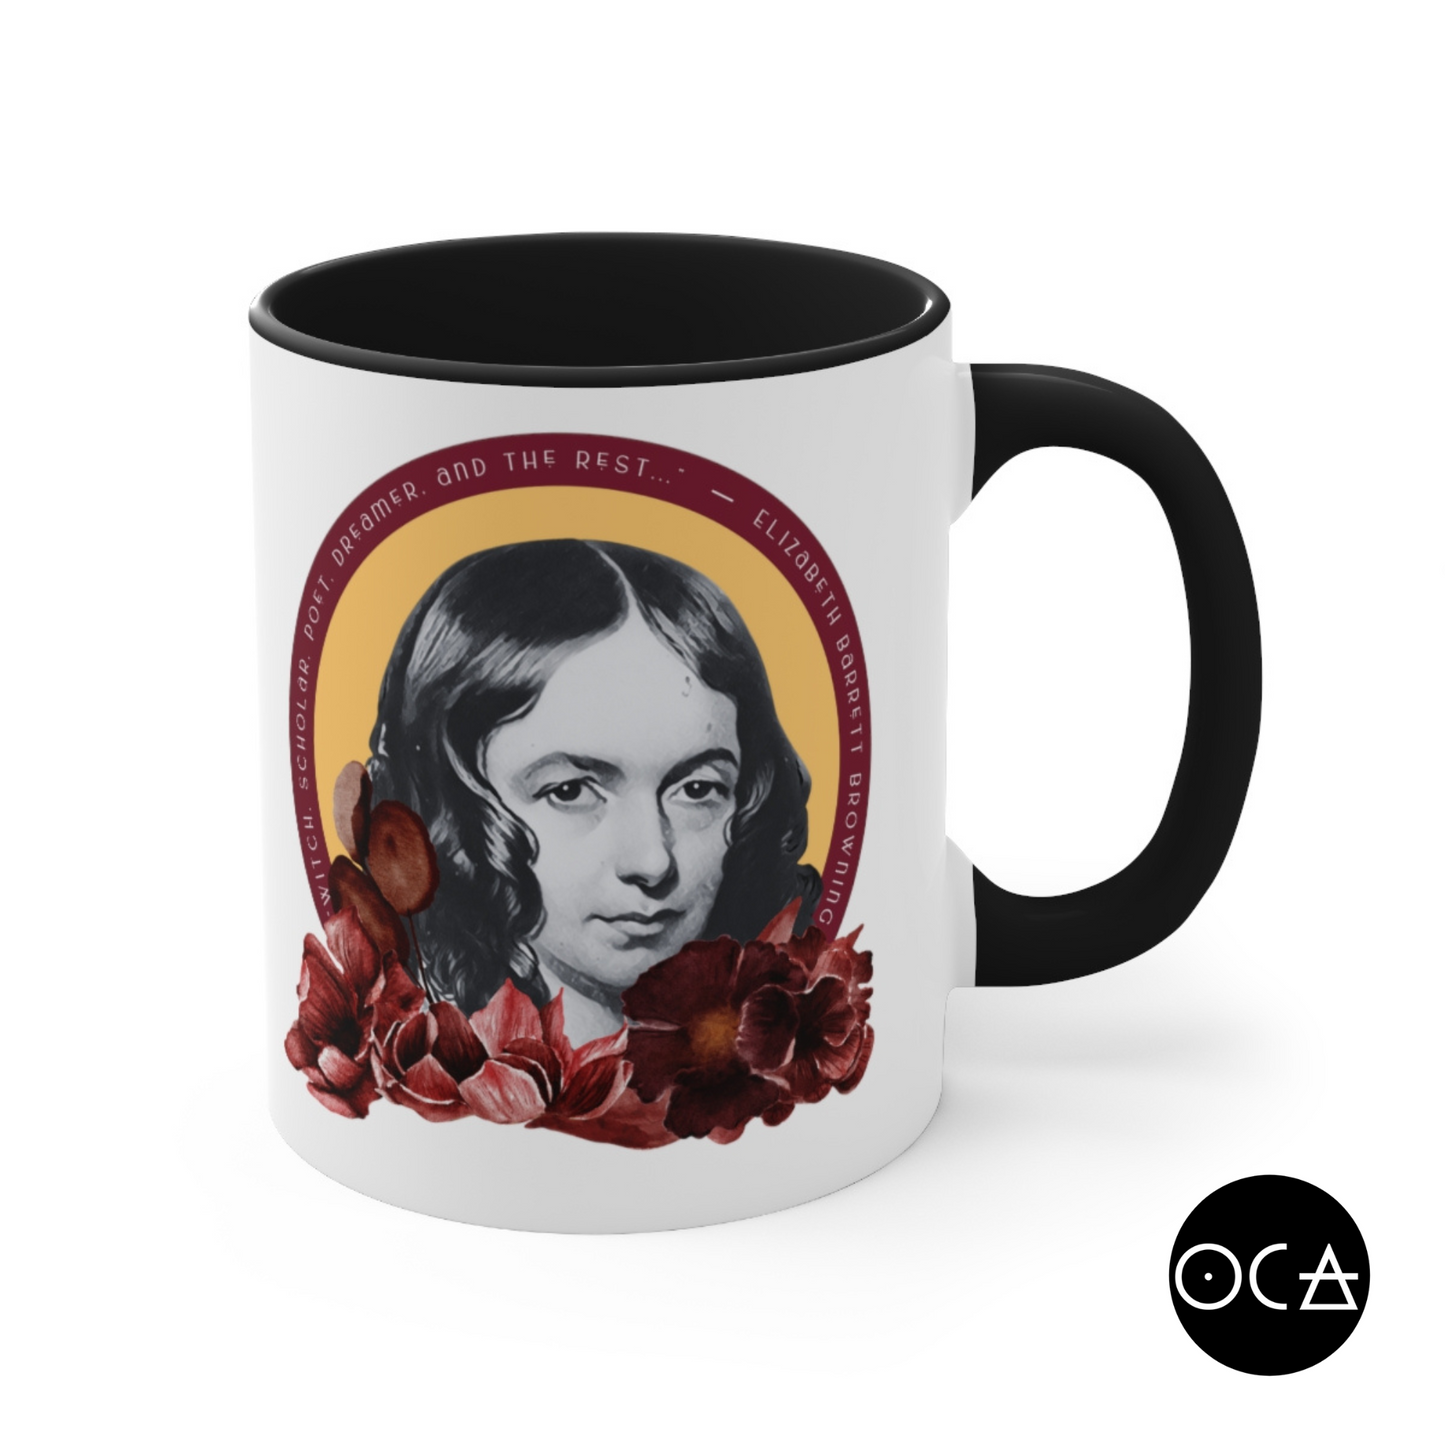 Elizabeth Barrett Browning Mug (Doublesided/2 Color Options) Herbteller Lucky Mugs | Gifts for Writers, Readers, Tellers, and Taleswappers